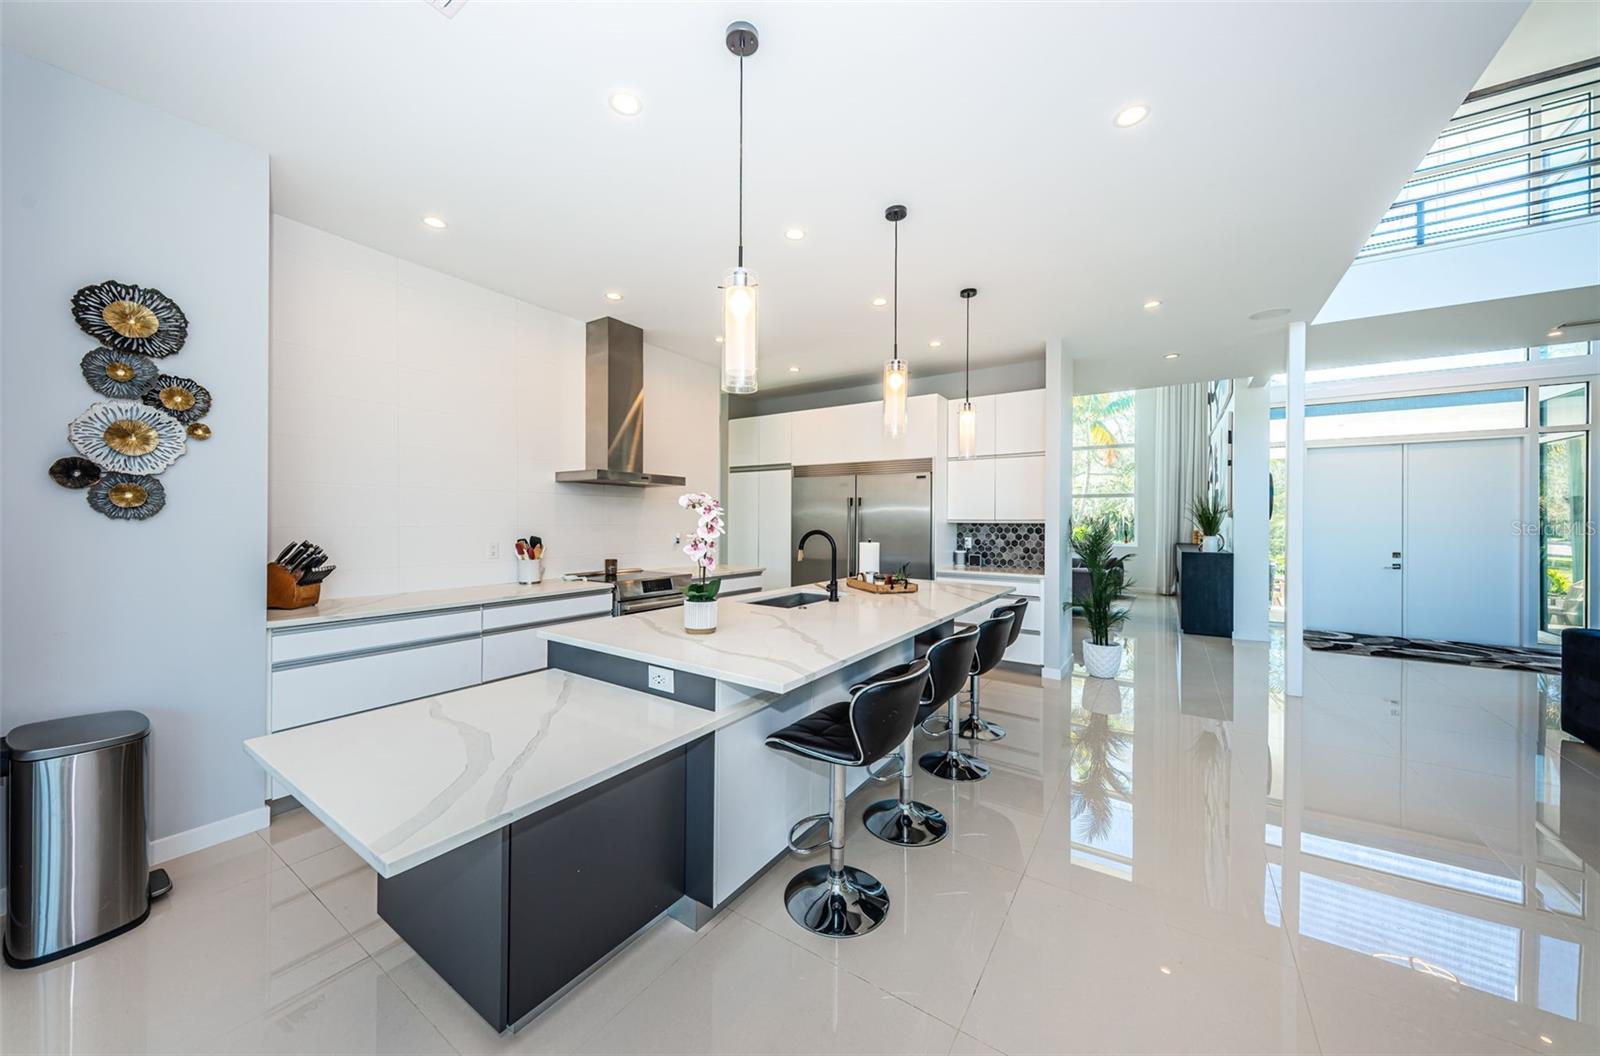 Amazing and open Kitchen with stainless steel appliances, oversize built-in refrigerator/freezer, stunning quartz counters and plentiful cabinets with abundant storage